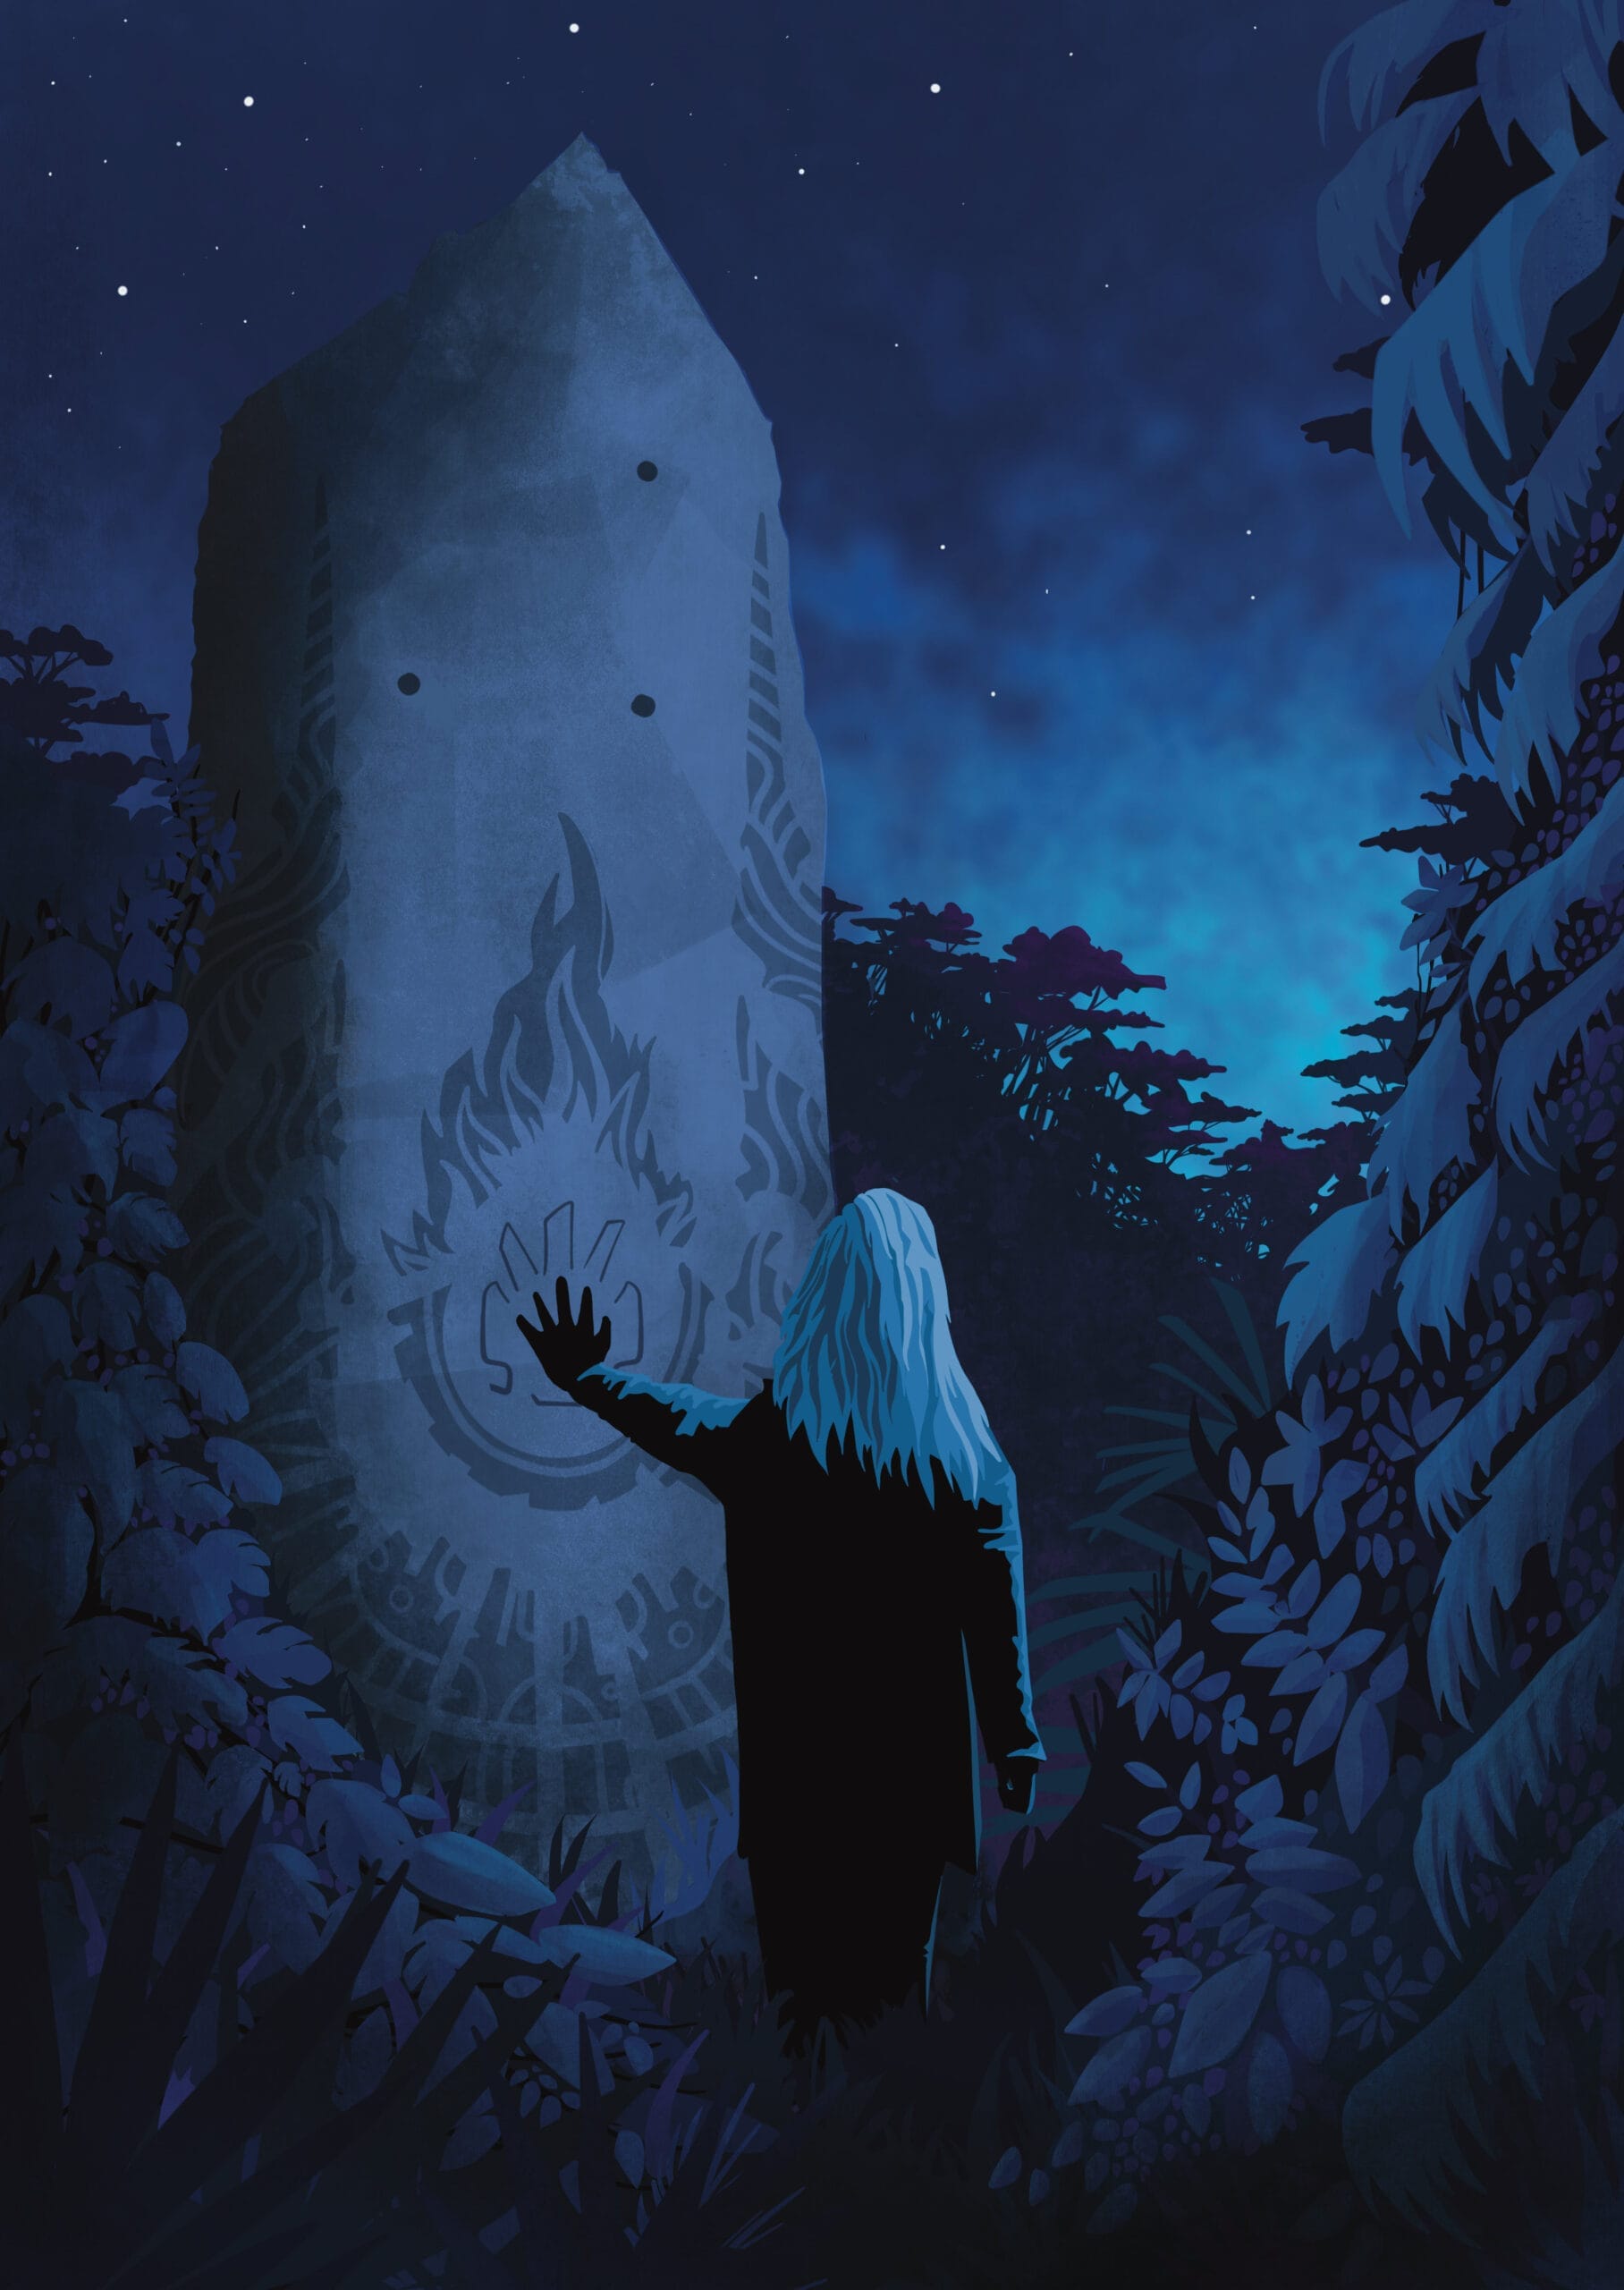 At night a long-haired person puts their hand on a standing stone